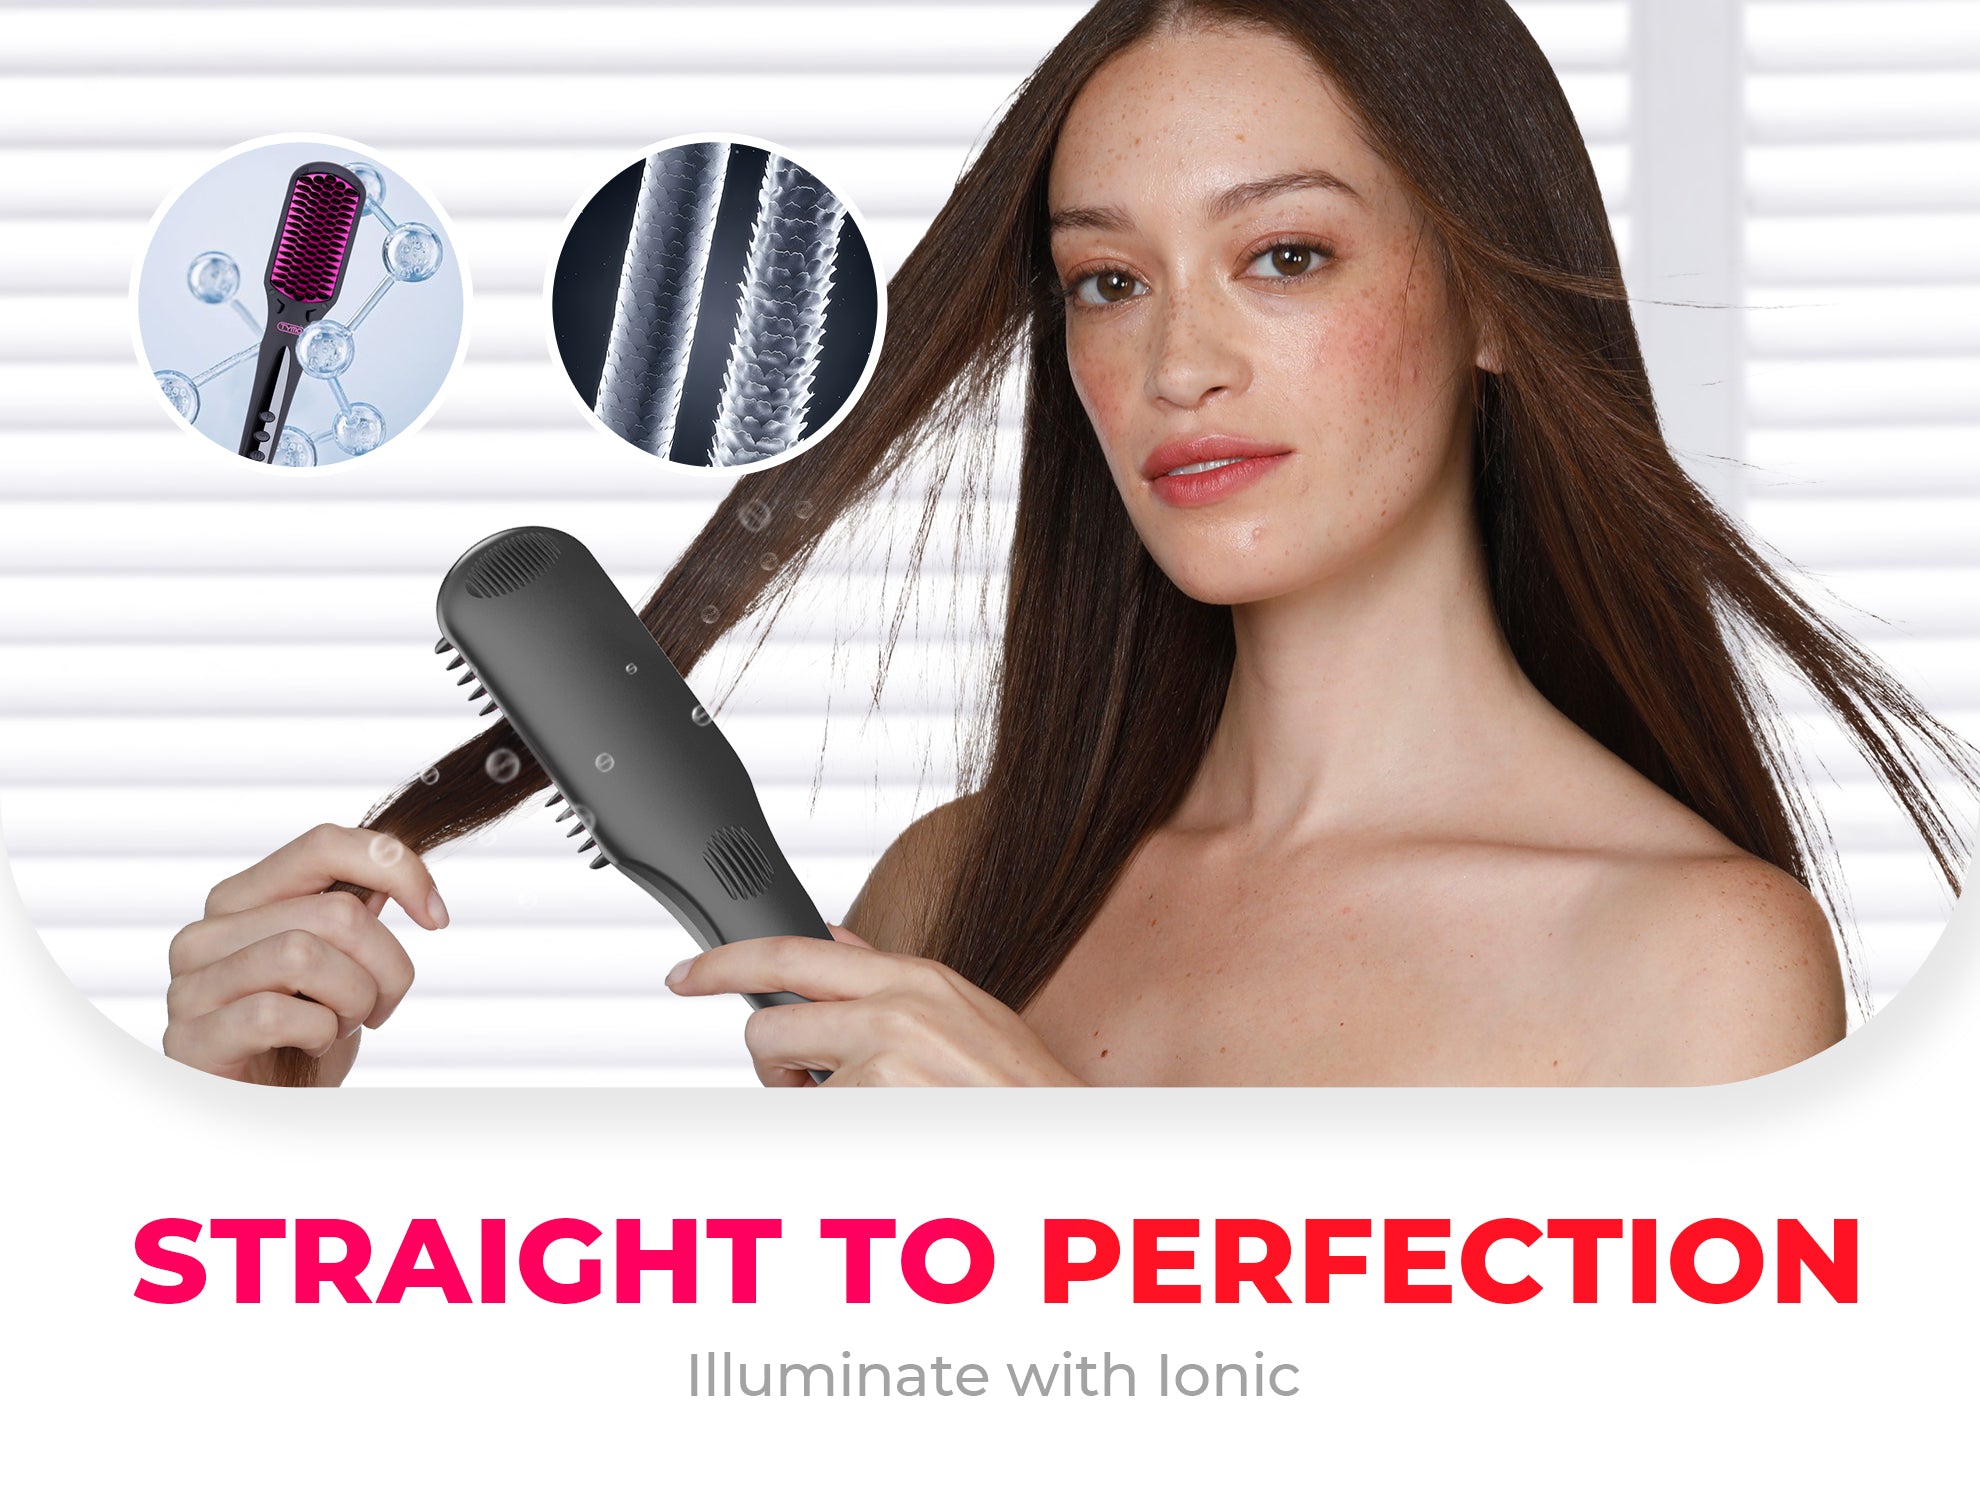 A woman using TYMO iONIC hair straightener for perfectly straight hair, illuminated with ions.